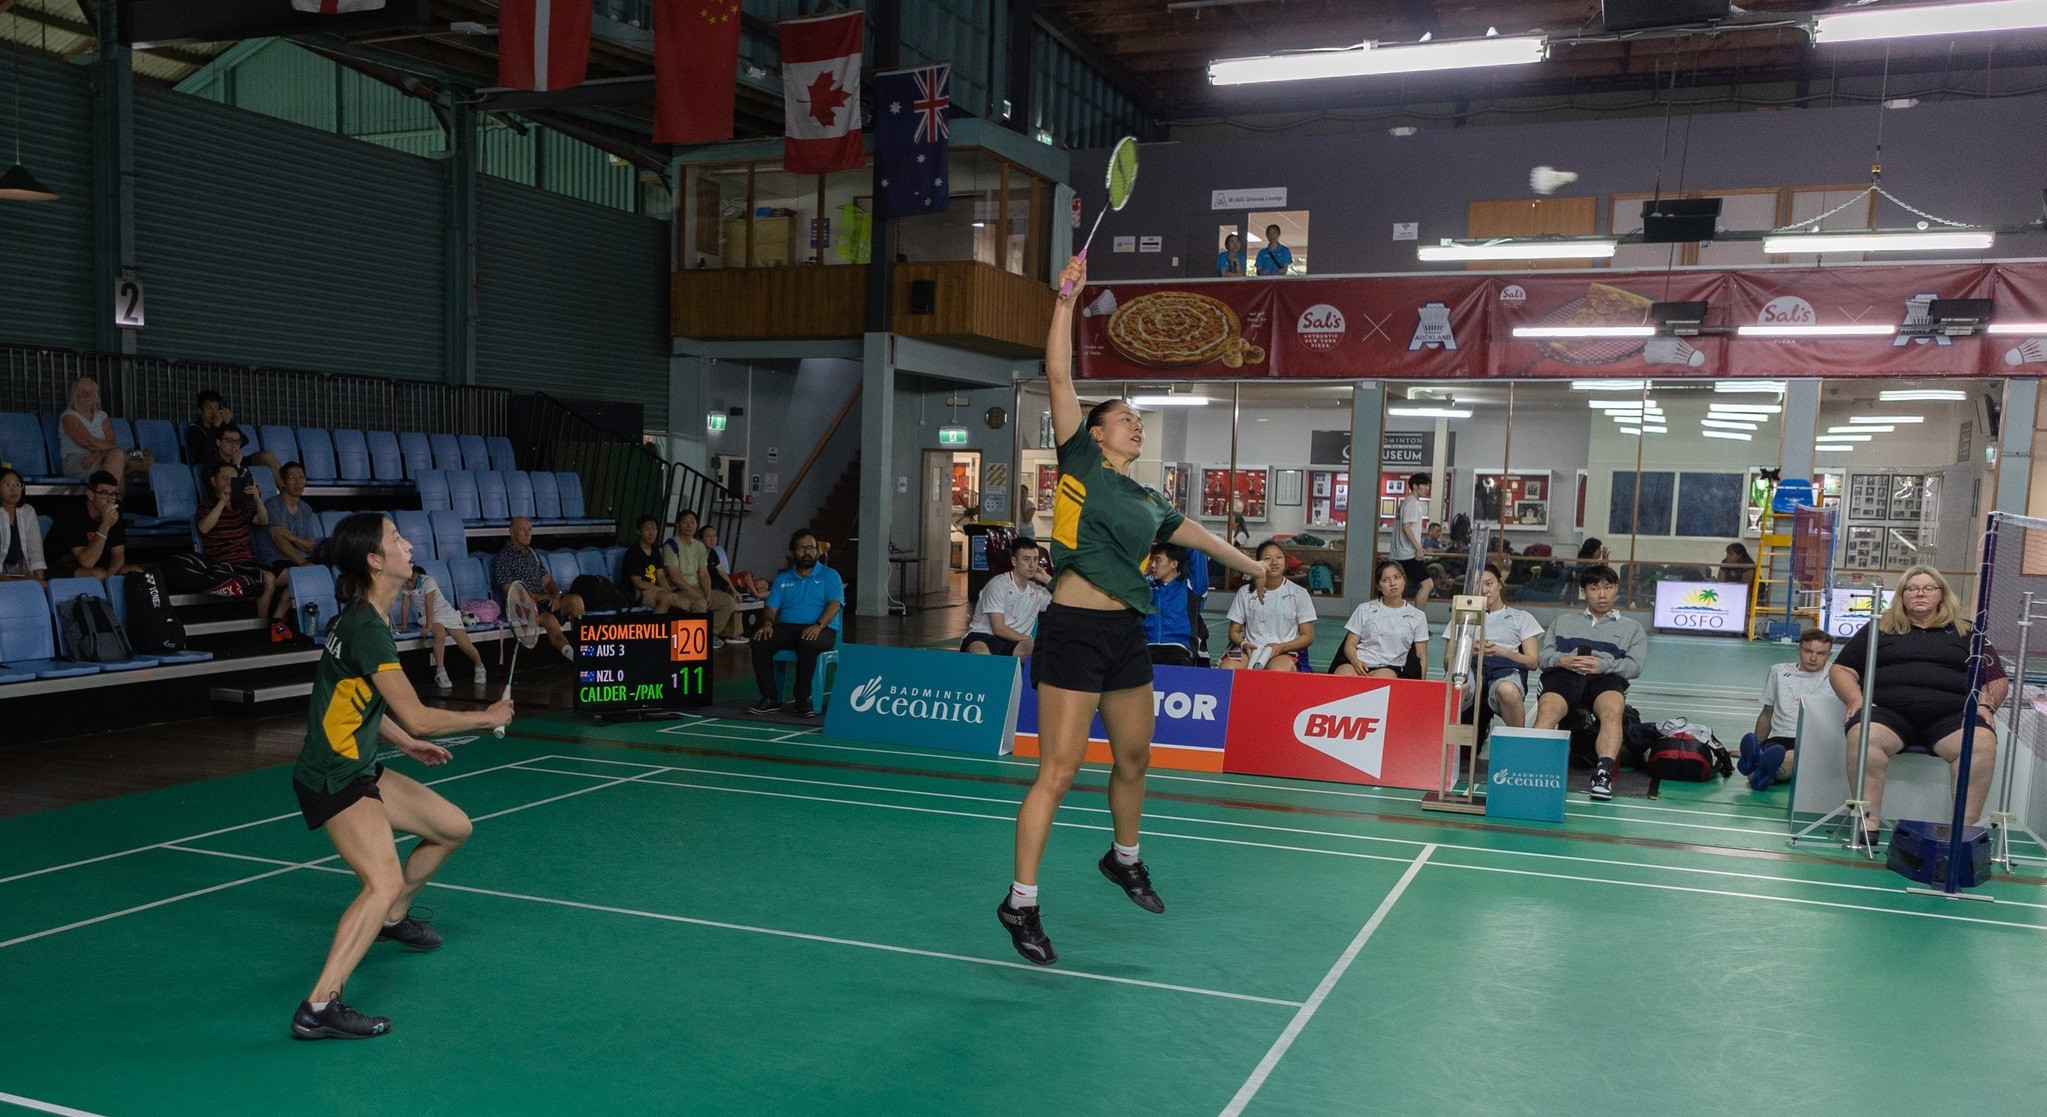 Australia powered to a 5-0 victory over New Zealand in Auckland ©Paul Foxall/Badminton Oceania